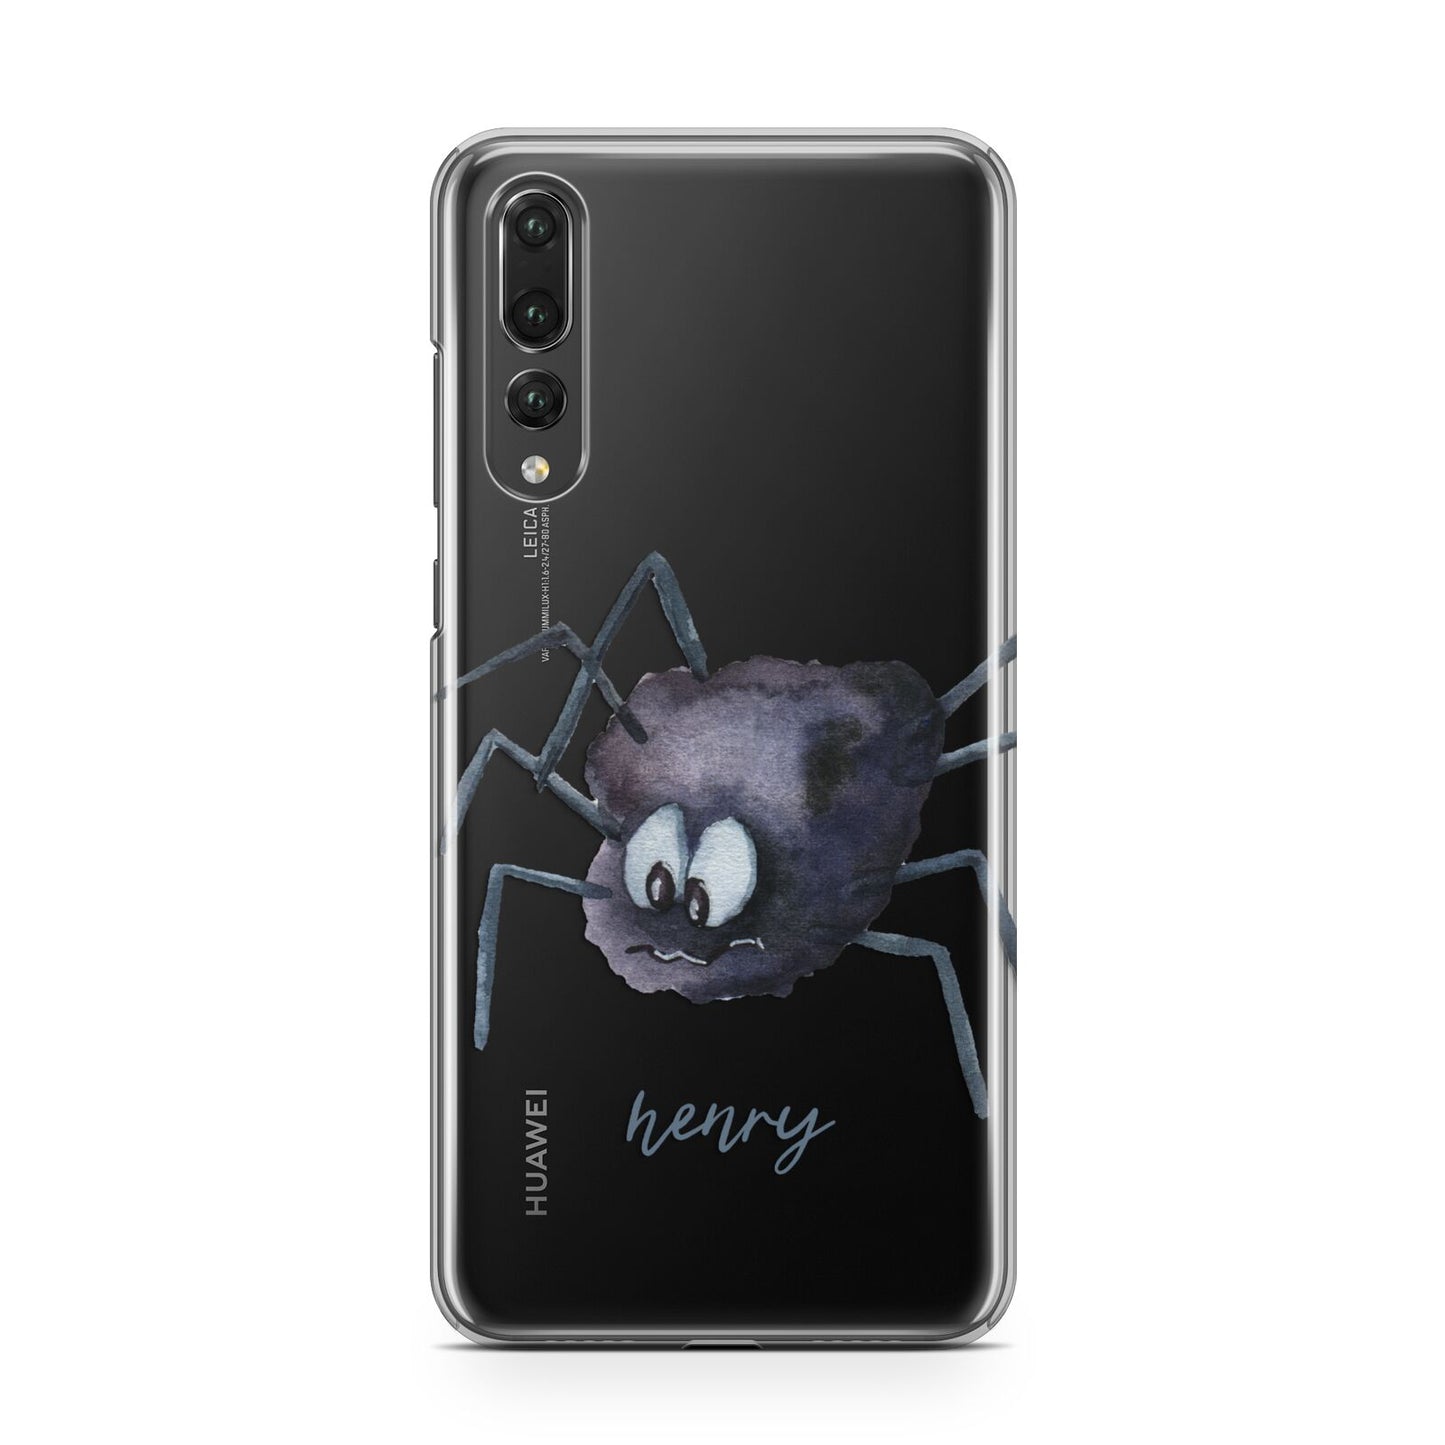 Scared Spider Personalised Huawei P20 Pro Phone Case